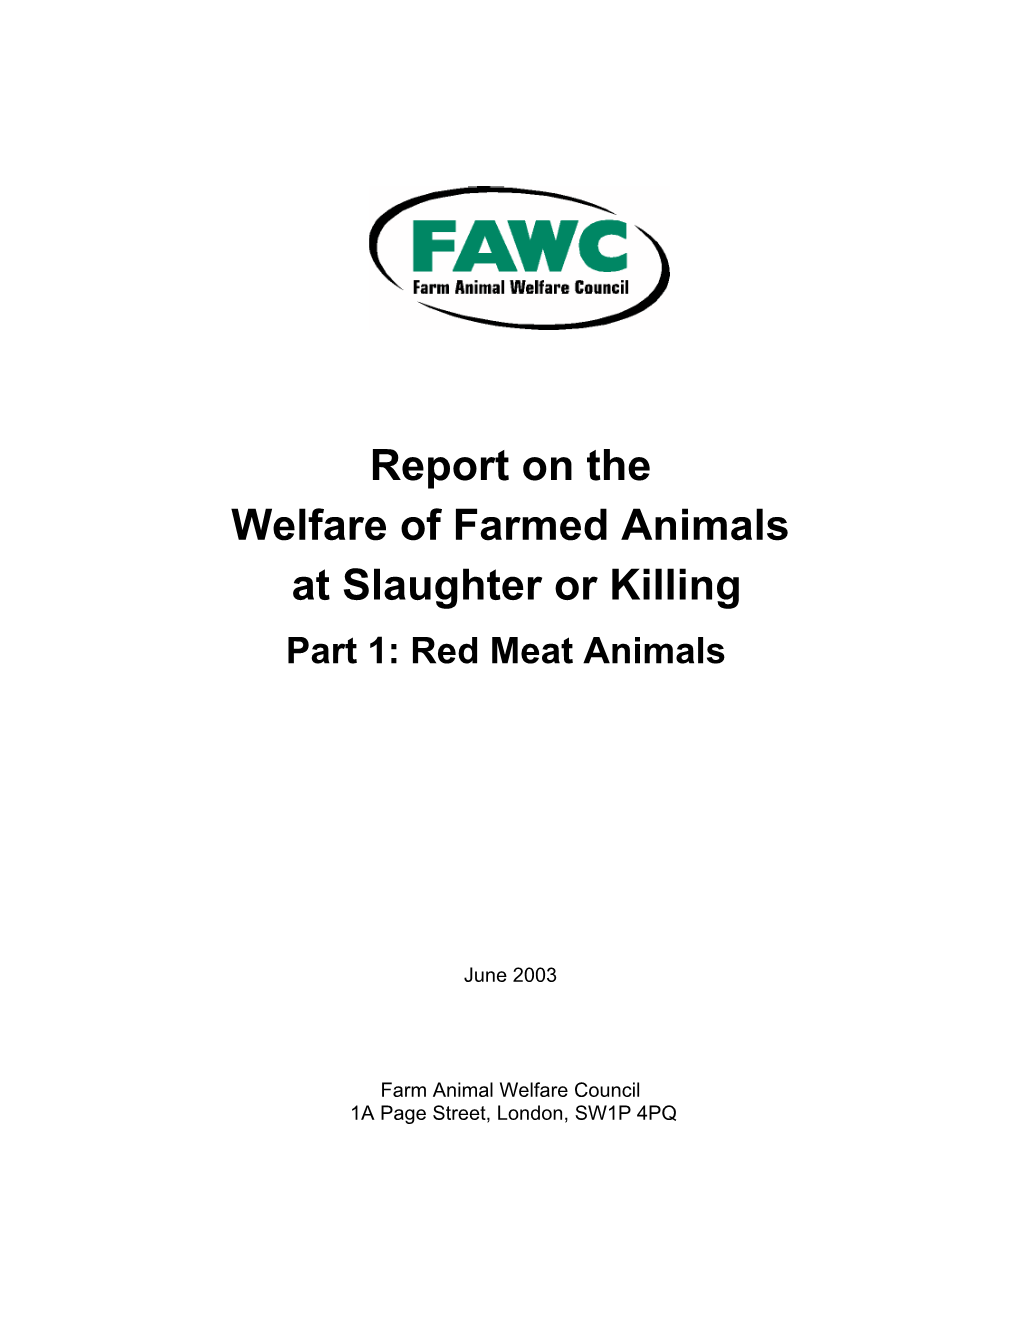 Report on the Welfare of Farmed Animals at Slaughter Or Killing Part 1: Red Meat Animals